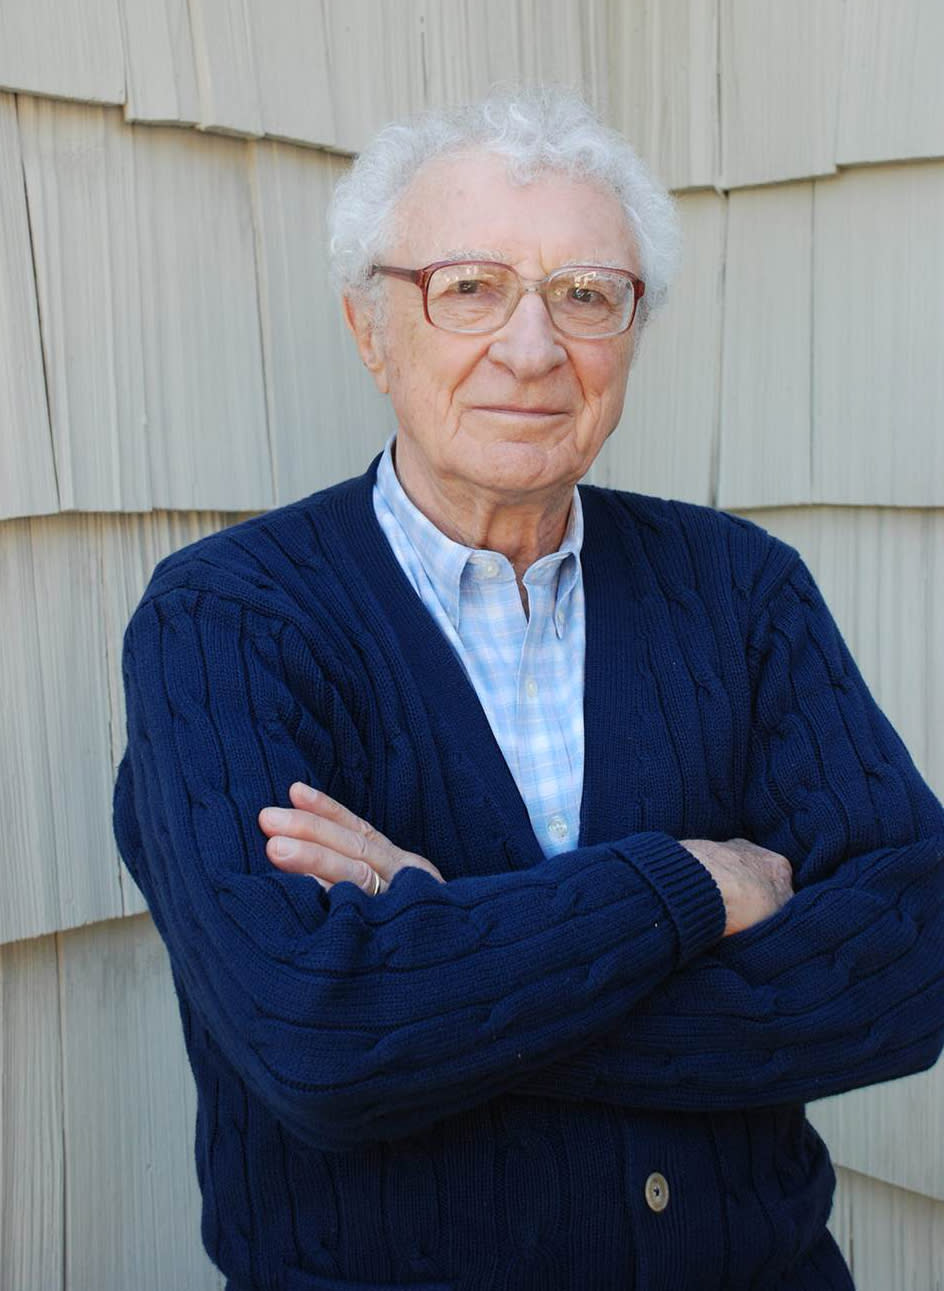 This 2012 image released by Katz Public Relations shows Sheldon Harnick at his home in East Hampton, N.Y. The 89-year-old Tony- and Grammy Award-winning lyricist and writer has written a few musicals, including; "Dragons," a new musical based on the Moliere comedy "The Doctor in Spite of Himself, "Smiling, The Boy Fell Dead," based on a book by Ira Wallach and the 1960 off-Broadway flop, and "Dragons" based on Yevgeny Schwartz's play "The Dragon," which Harnick saw in 1963 and thought cried out to be made into a musical. (AP Photo/Katz Public Relations, Matthew Harnick)